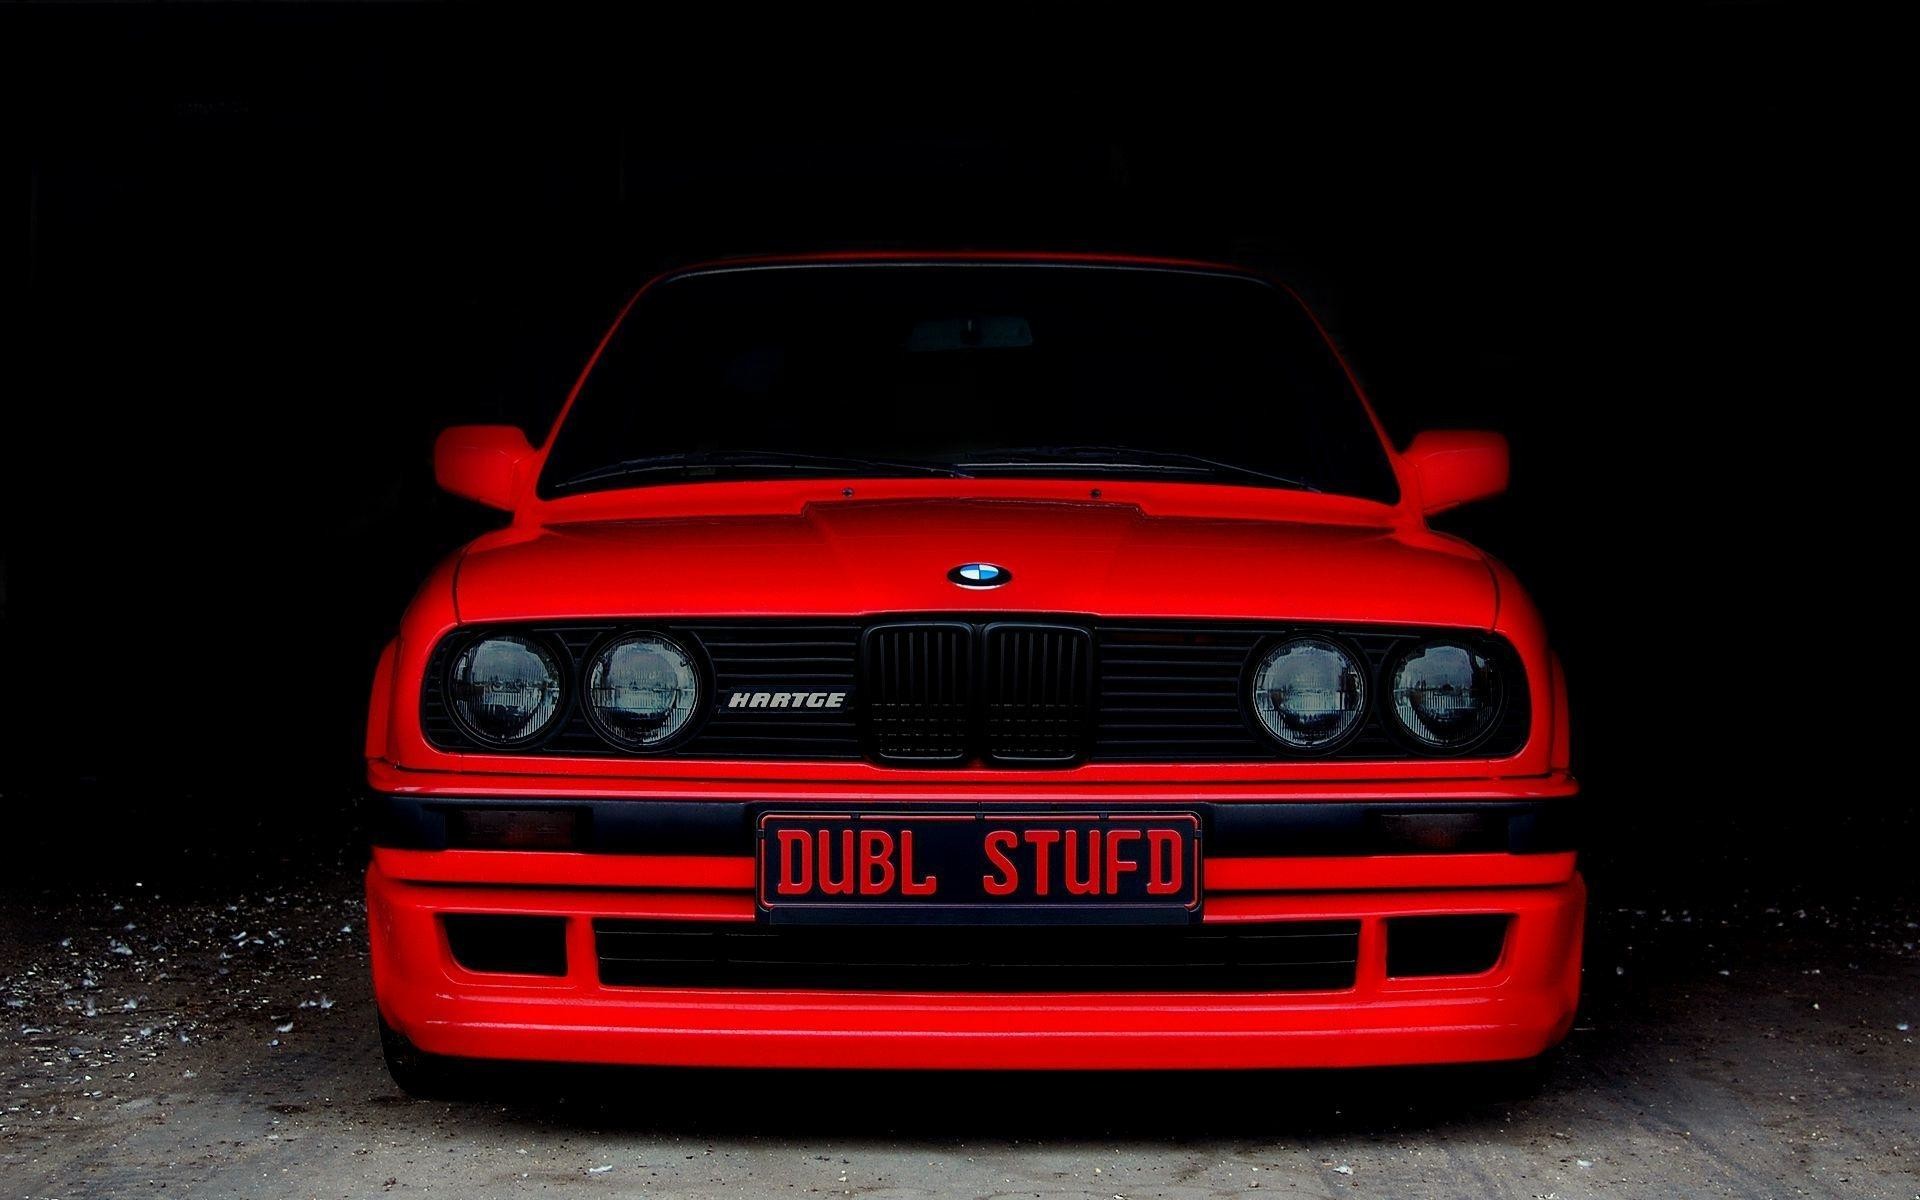 wallpaper.wiki-Best-Bmw-E30-Wallpapers-1920×1200-PIC-